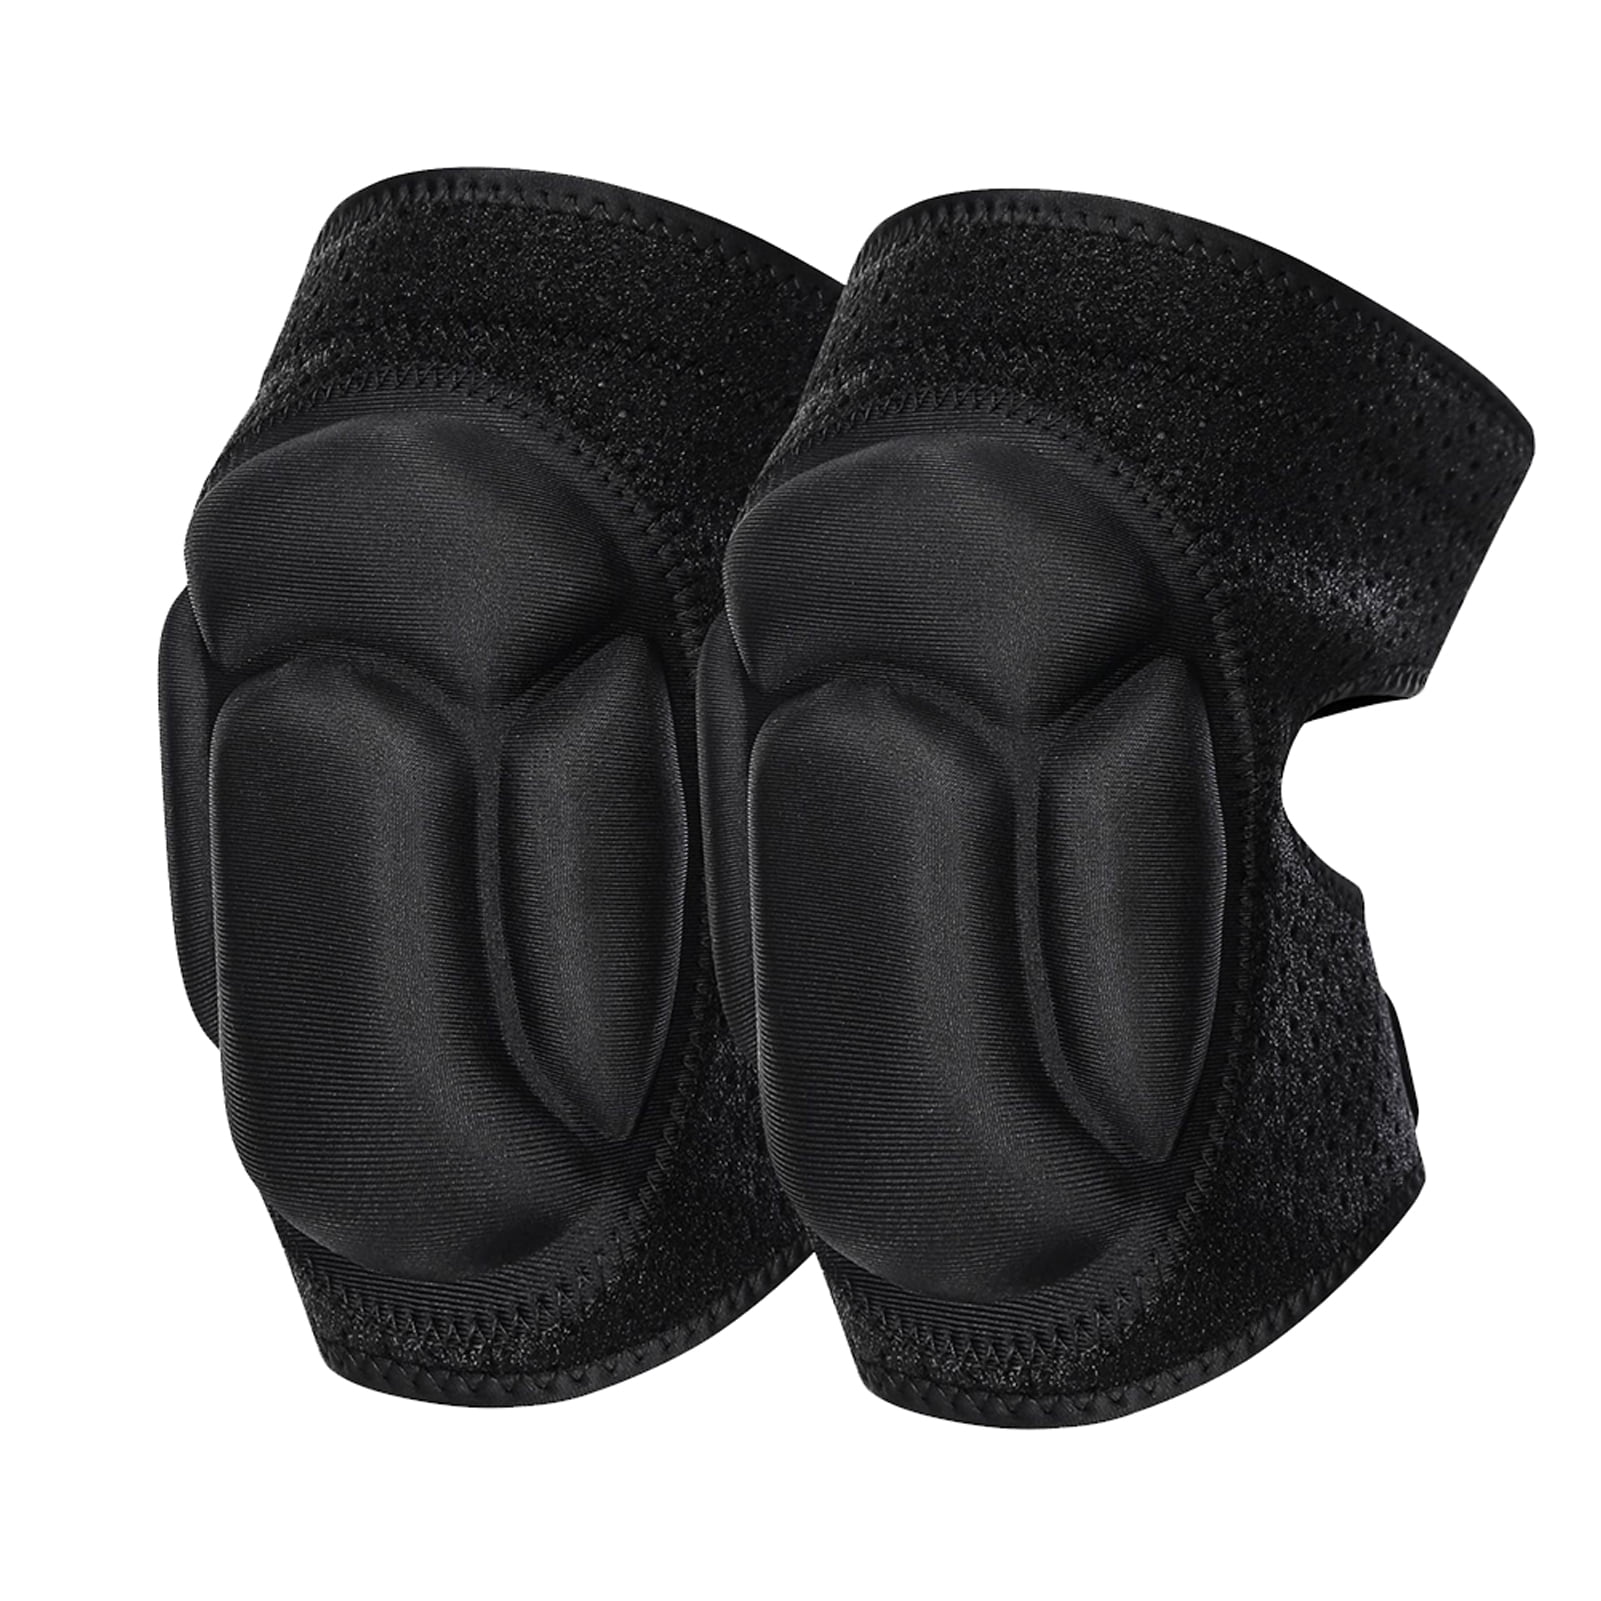 Protective Knee Pads With Straps For Work Flexible And Durable Safety Equipment 